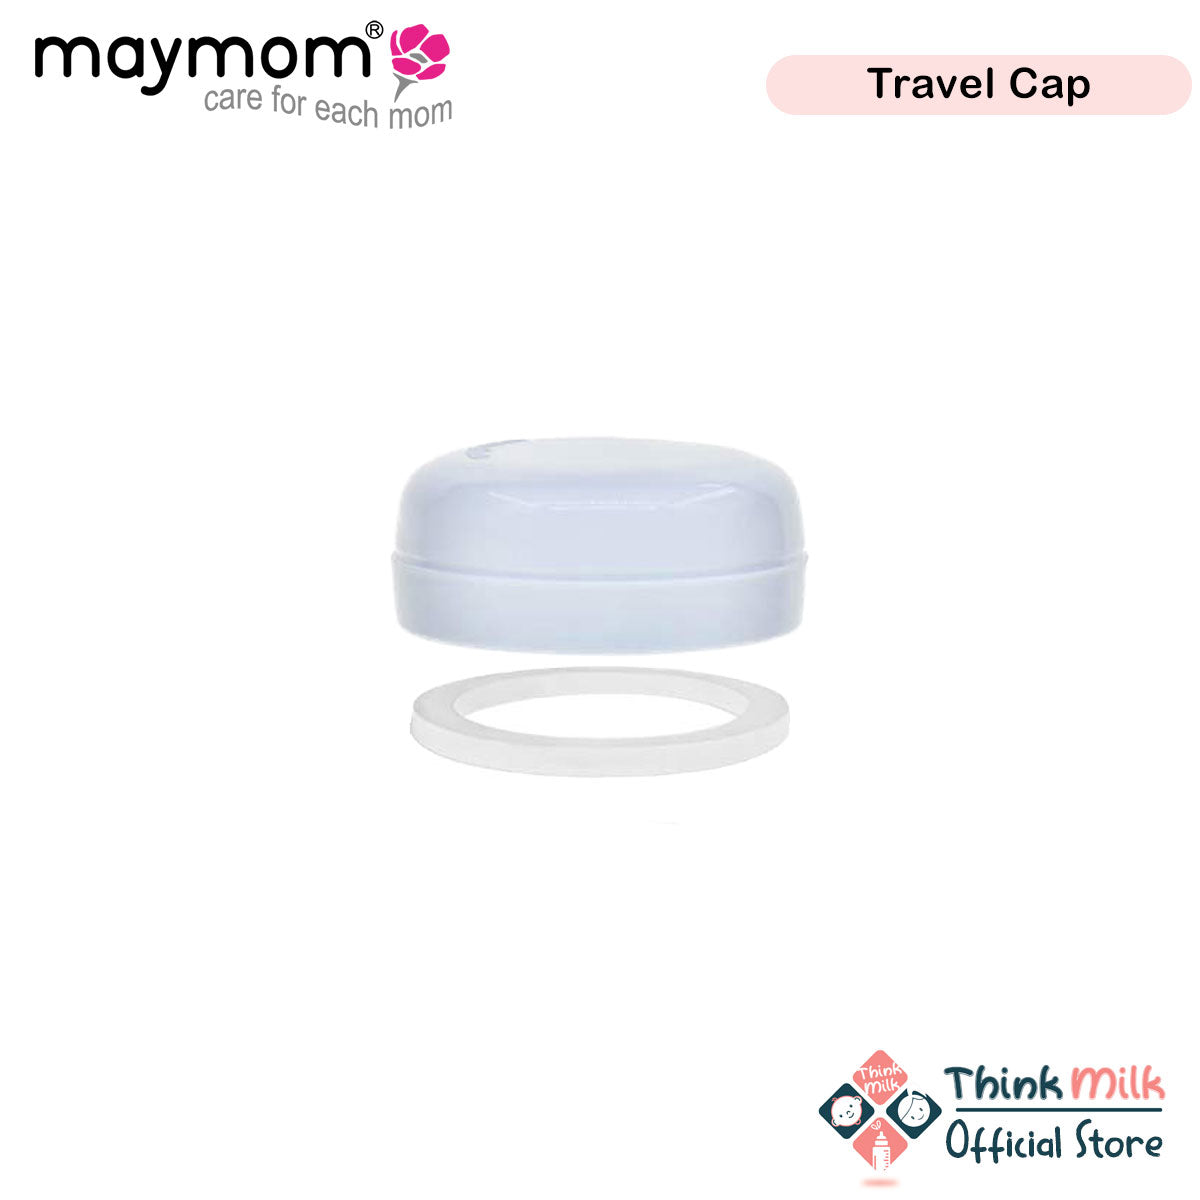 Maymom Screw Ring, Dome Cap, Sealing Disc for Avent or Wide Mouth Bottles